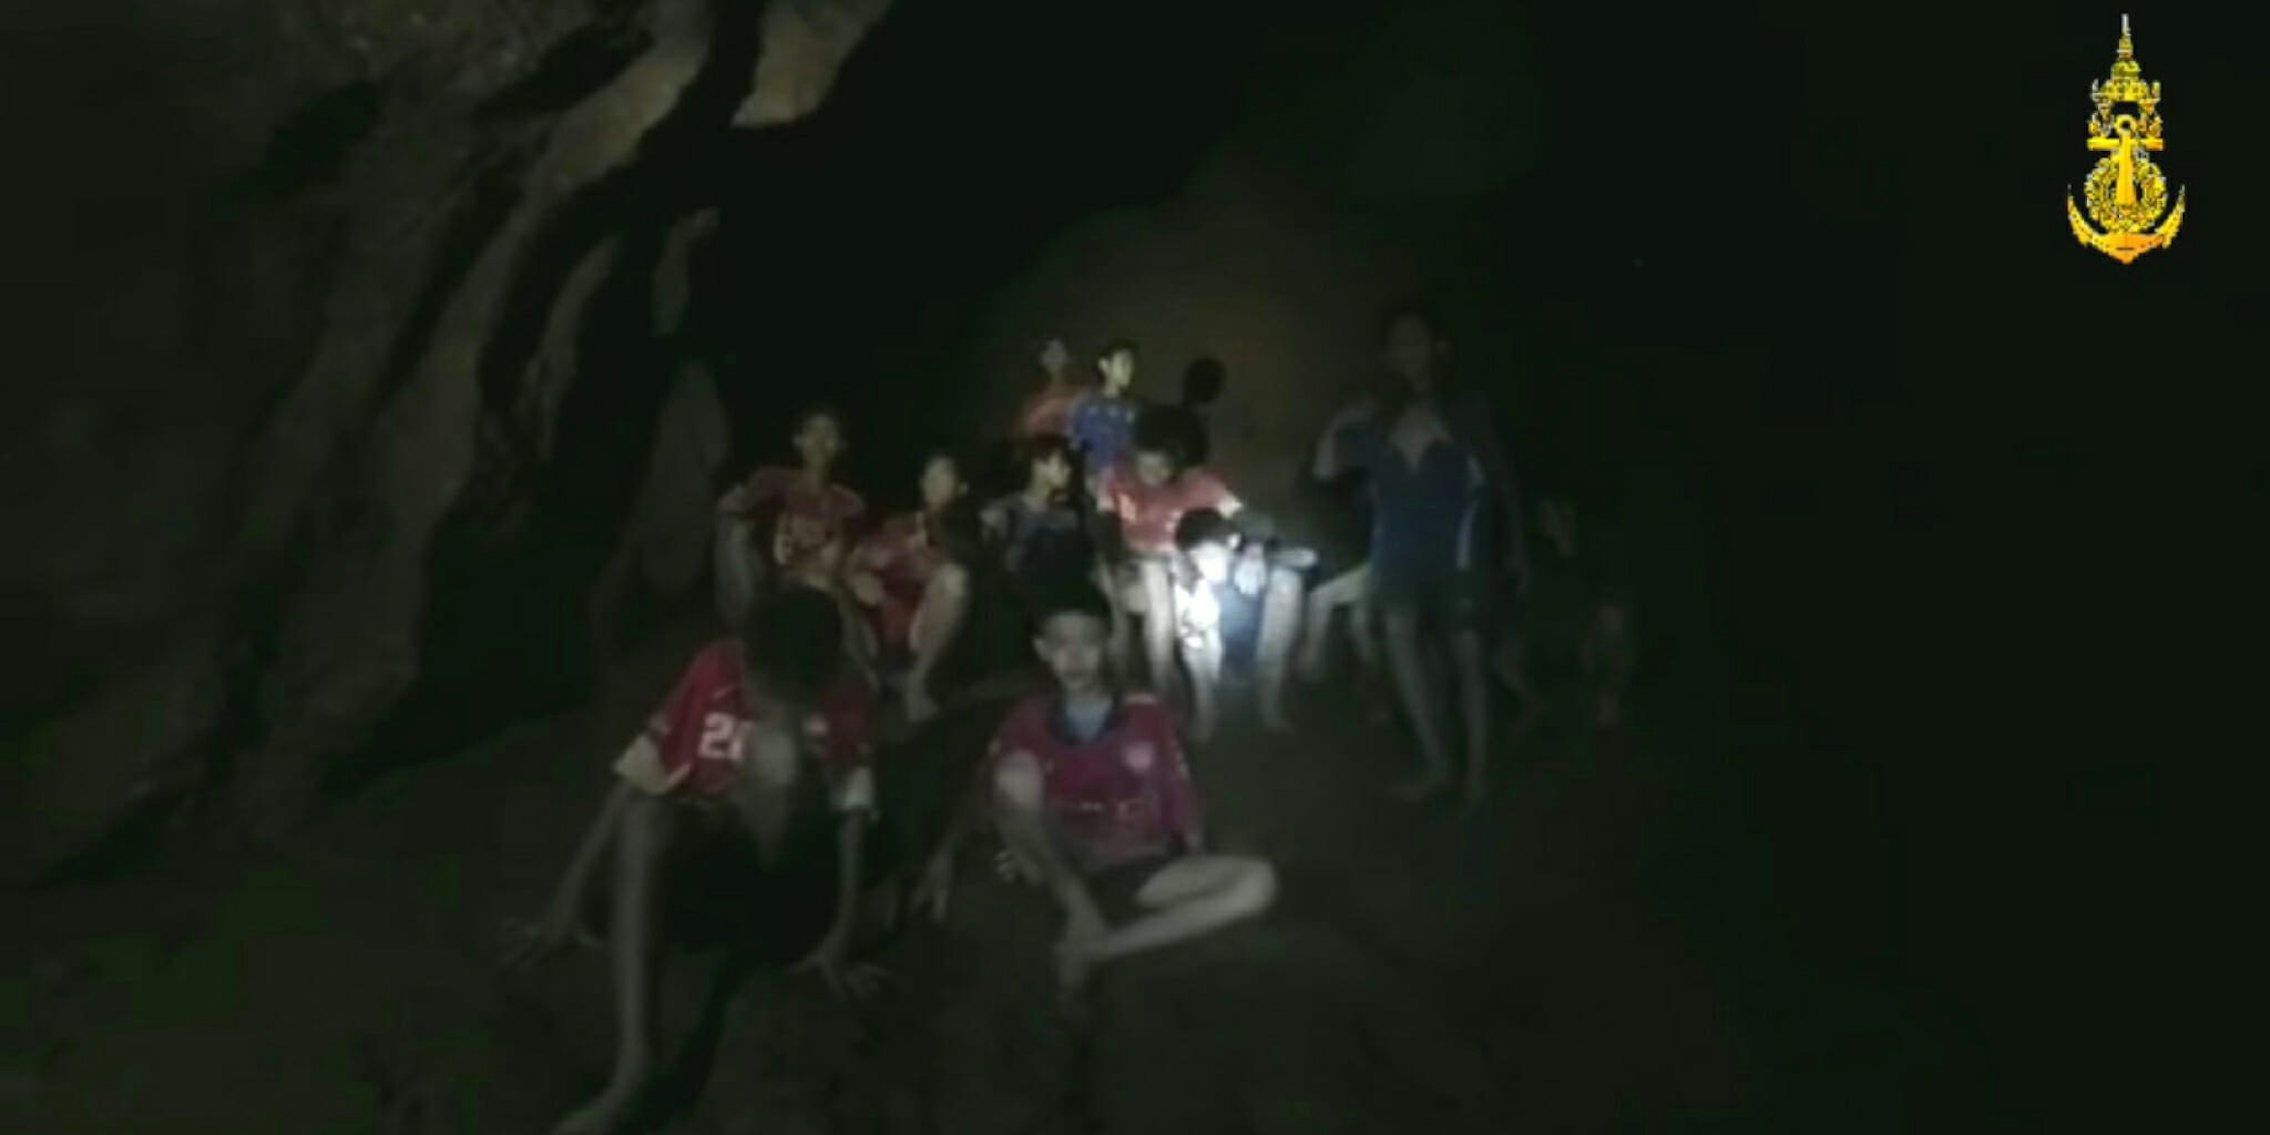 The Thai soccer team that went missing has been found underground in caves by divers.